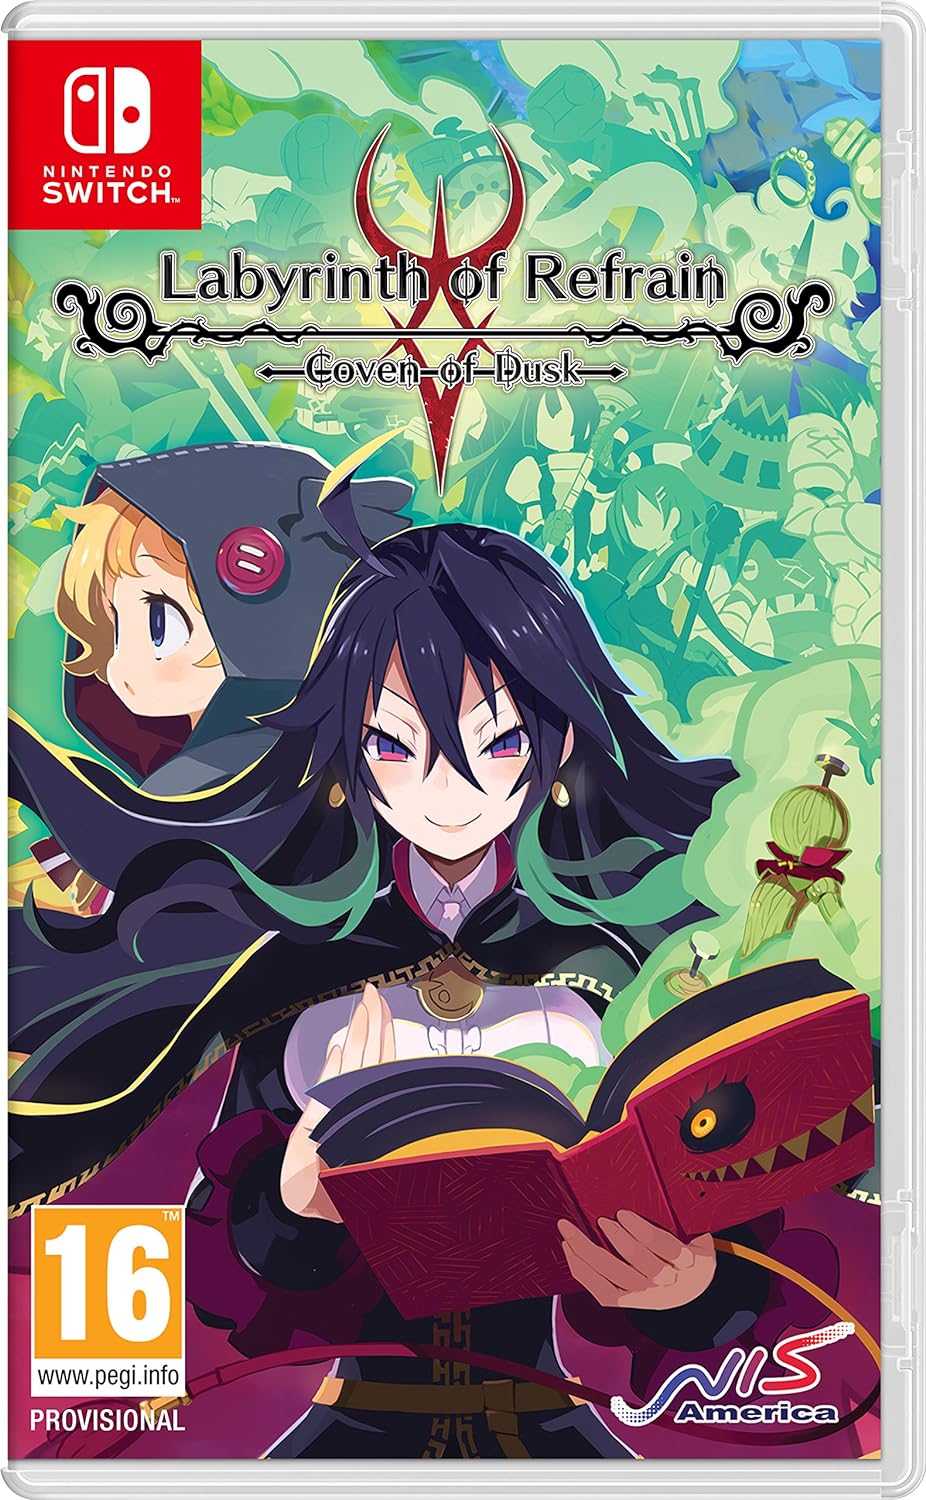 Labyrinth of Refrain: Coven of Dusk (Nintendo Switch)